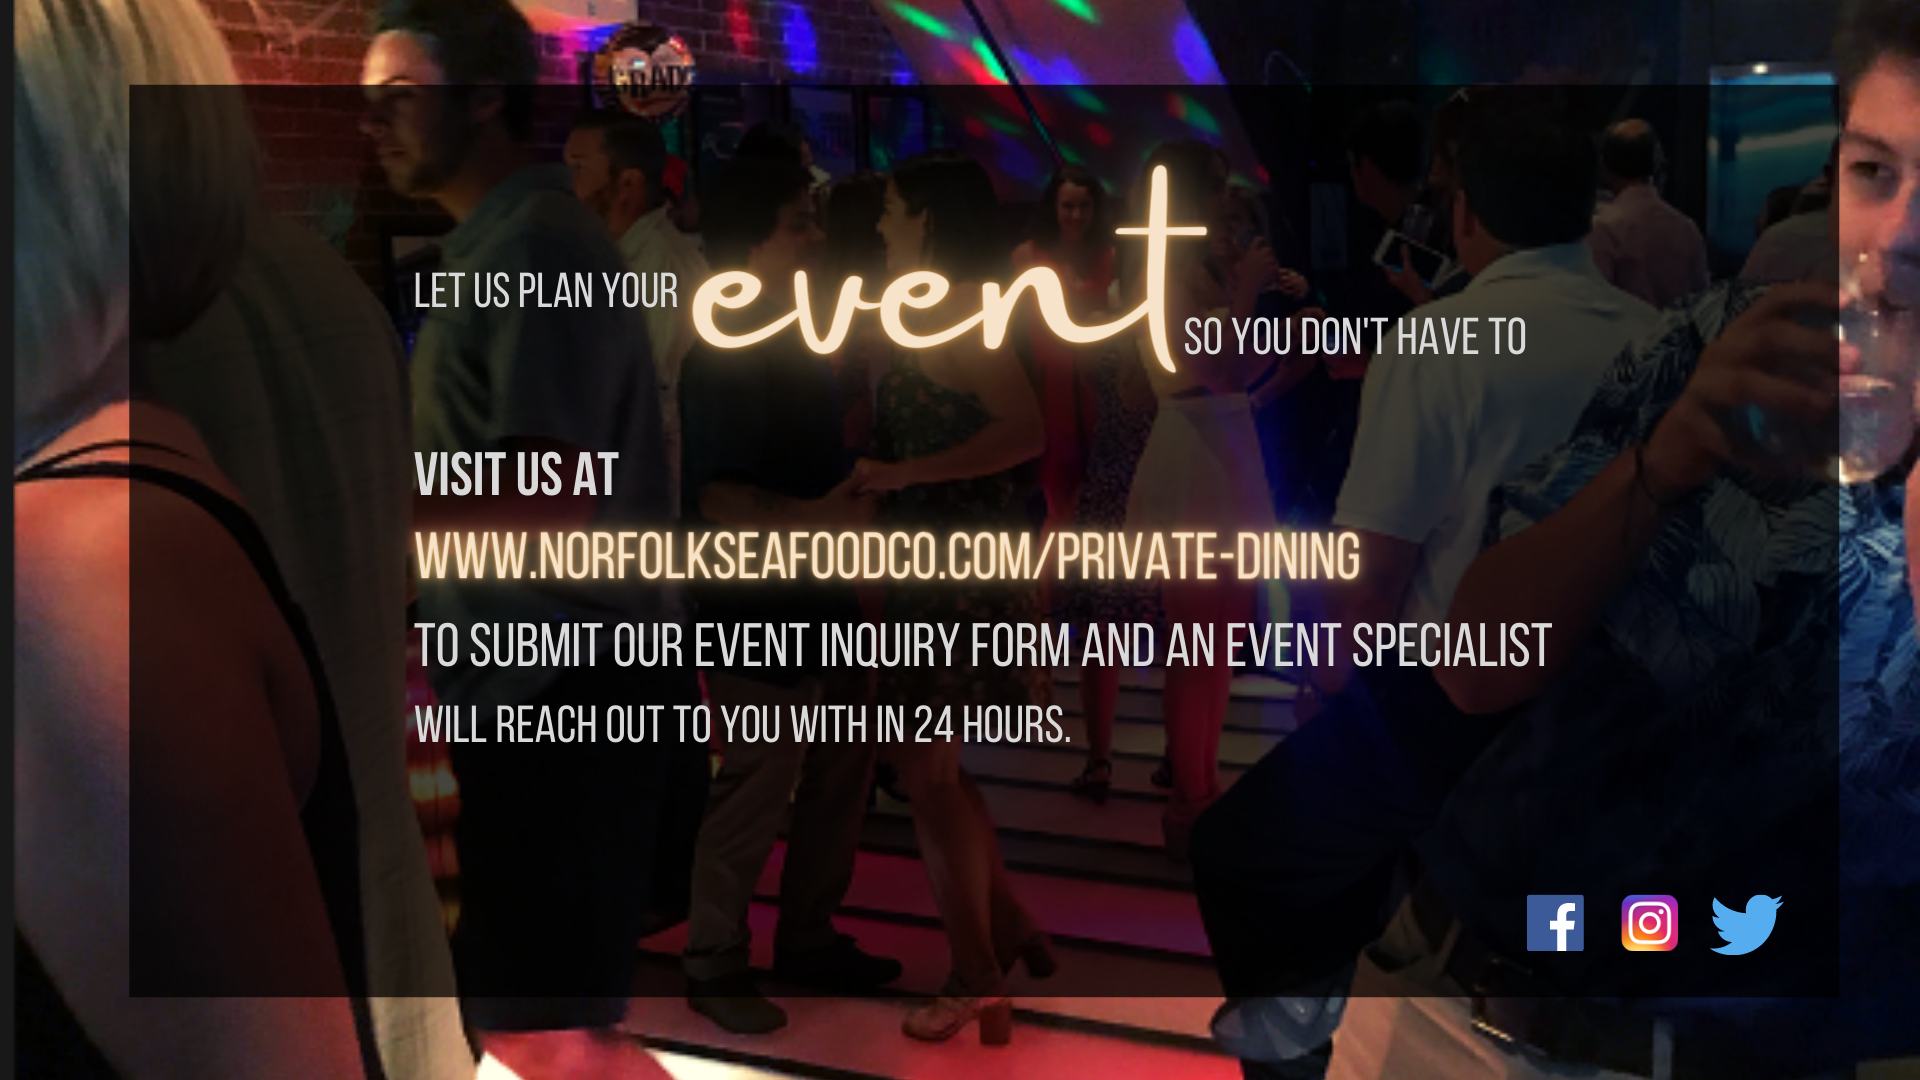 Let us plan your event so you don't have to. Visit us at www.norfolkseafoodco.com/private-dining to submit our event inquiry form and an event specialist will reach out to you with in 24 hours.